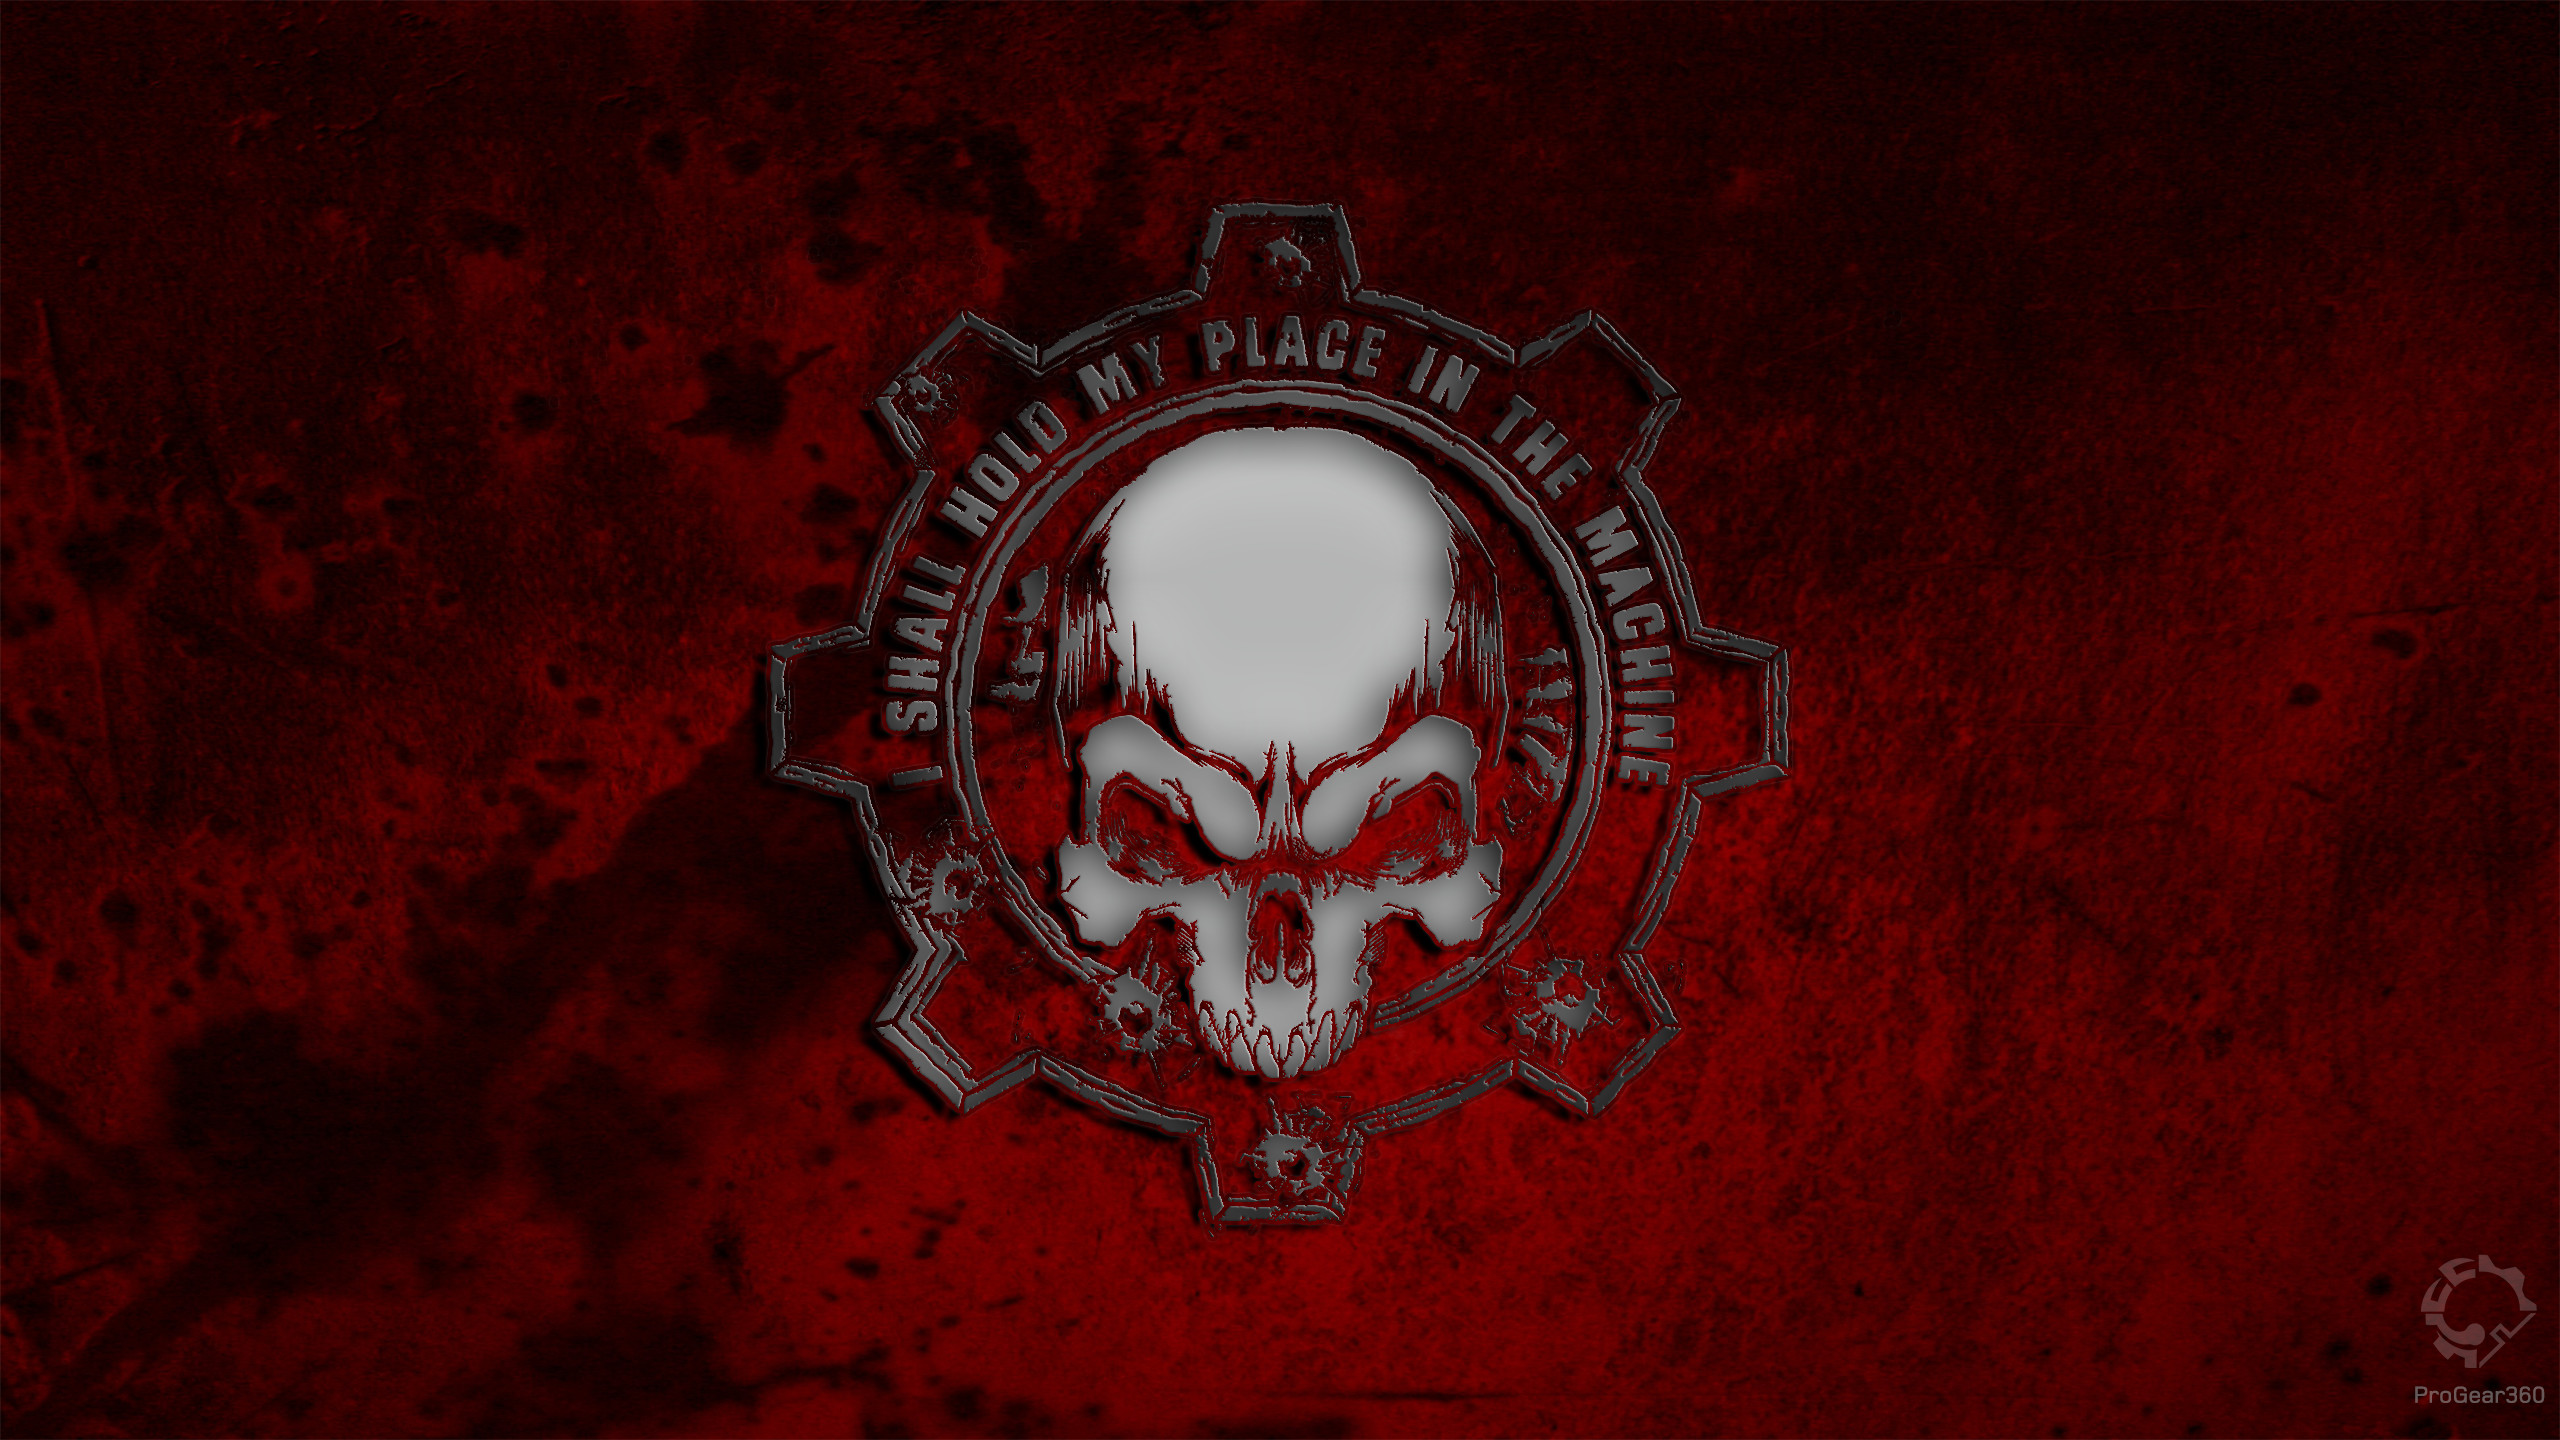 So I Saw The New Gears Of War 4 Wallpaper Get It Here But I Wanted To Give It Alittle More Quot Gearsyness Quot So Here Is My Version 2560x1440